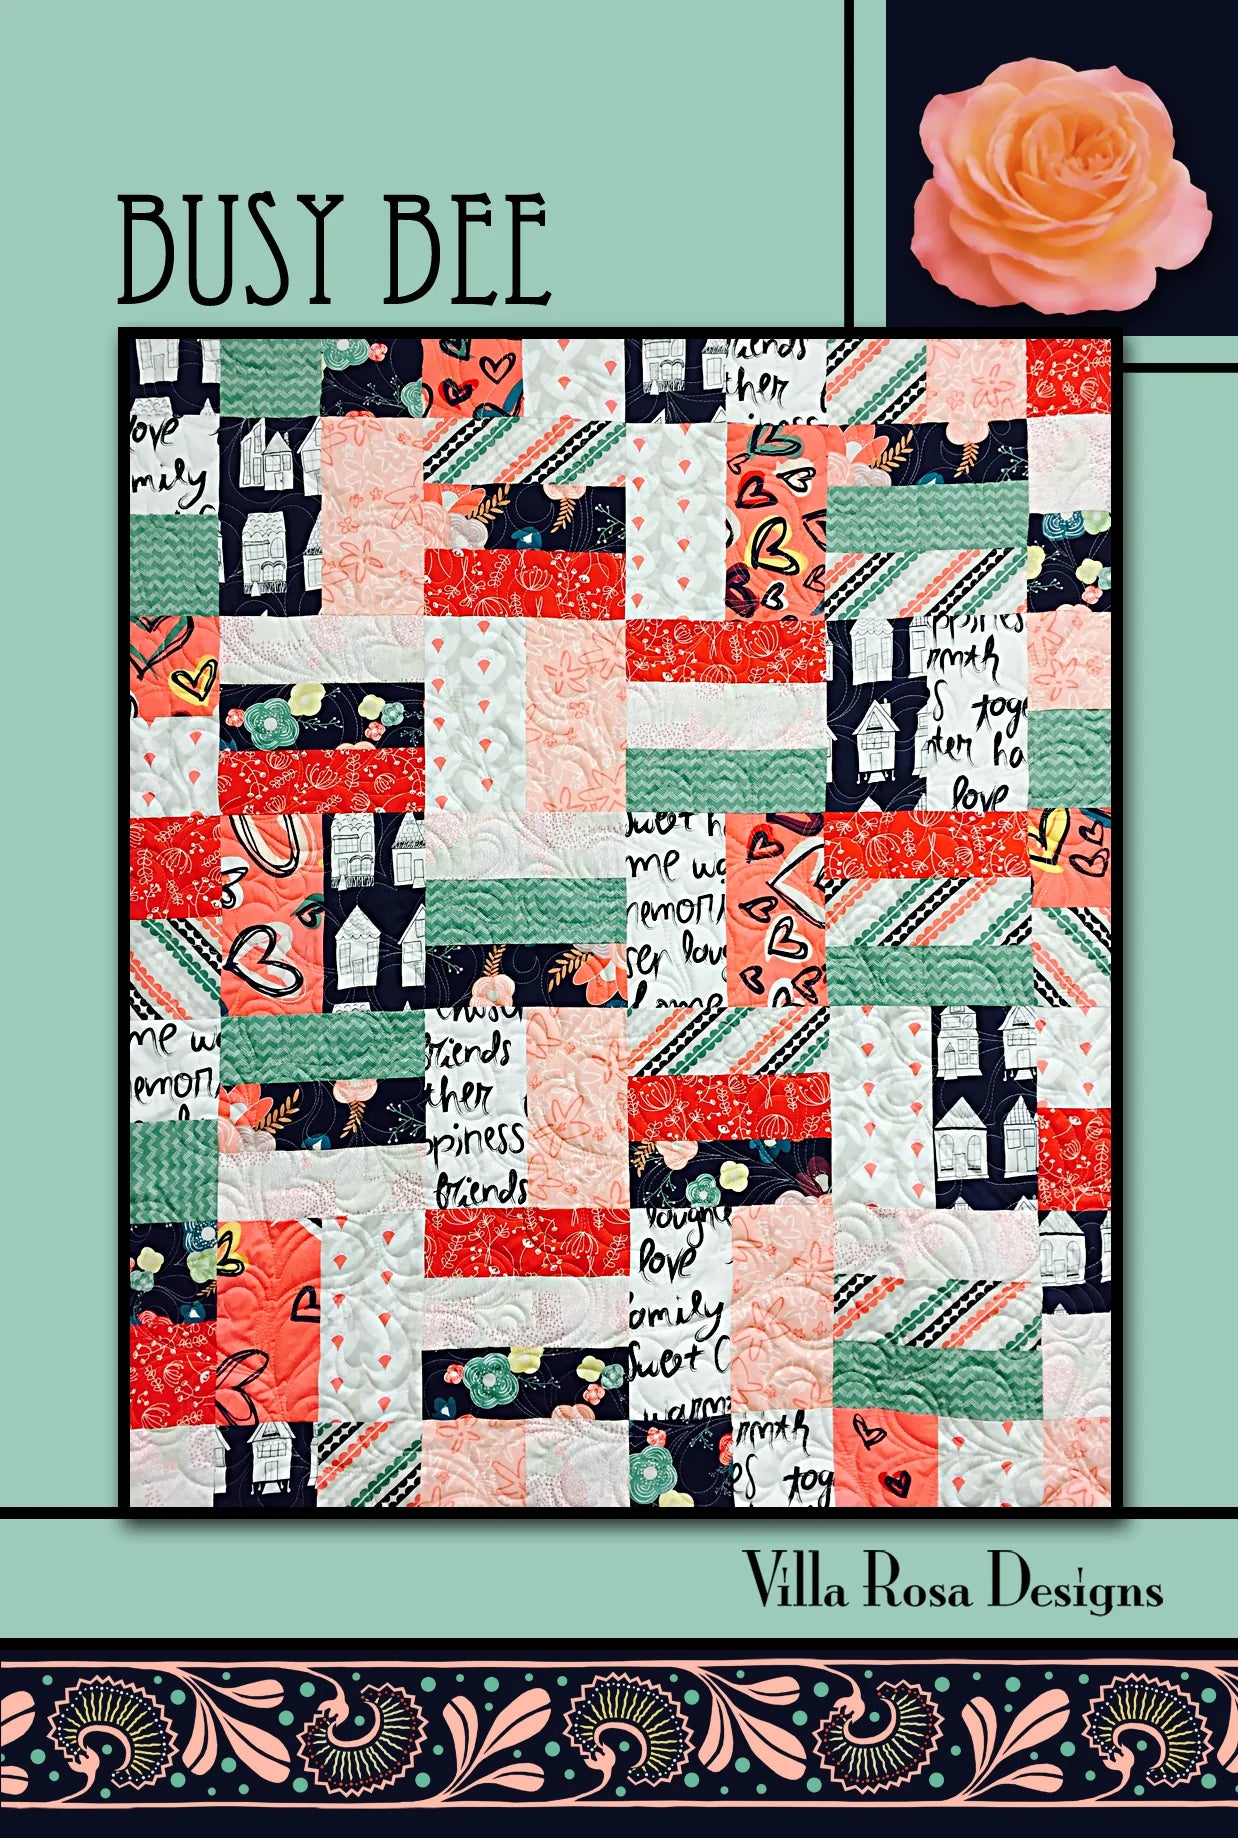 Busy Bee Quilt Pattern by Villa Rosa Designs